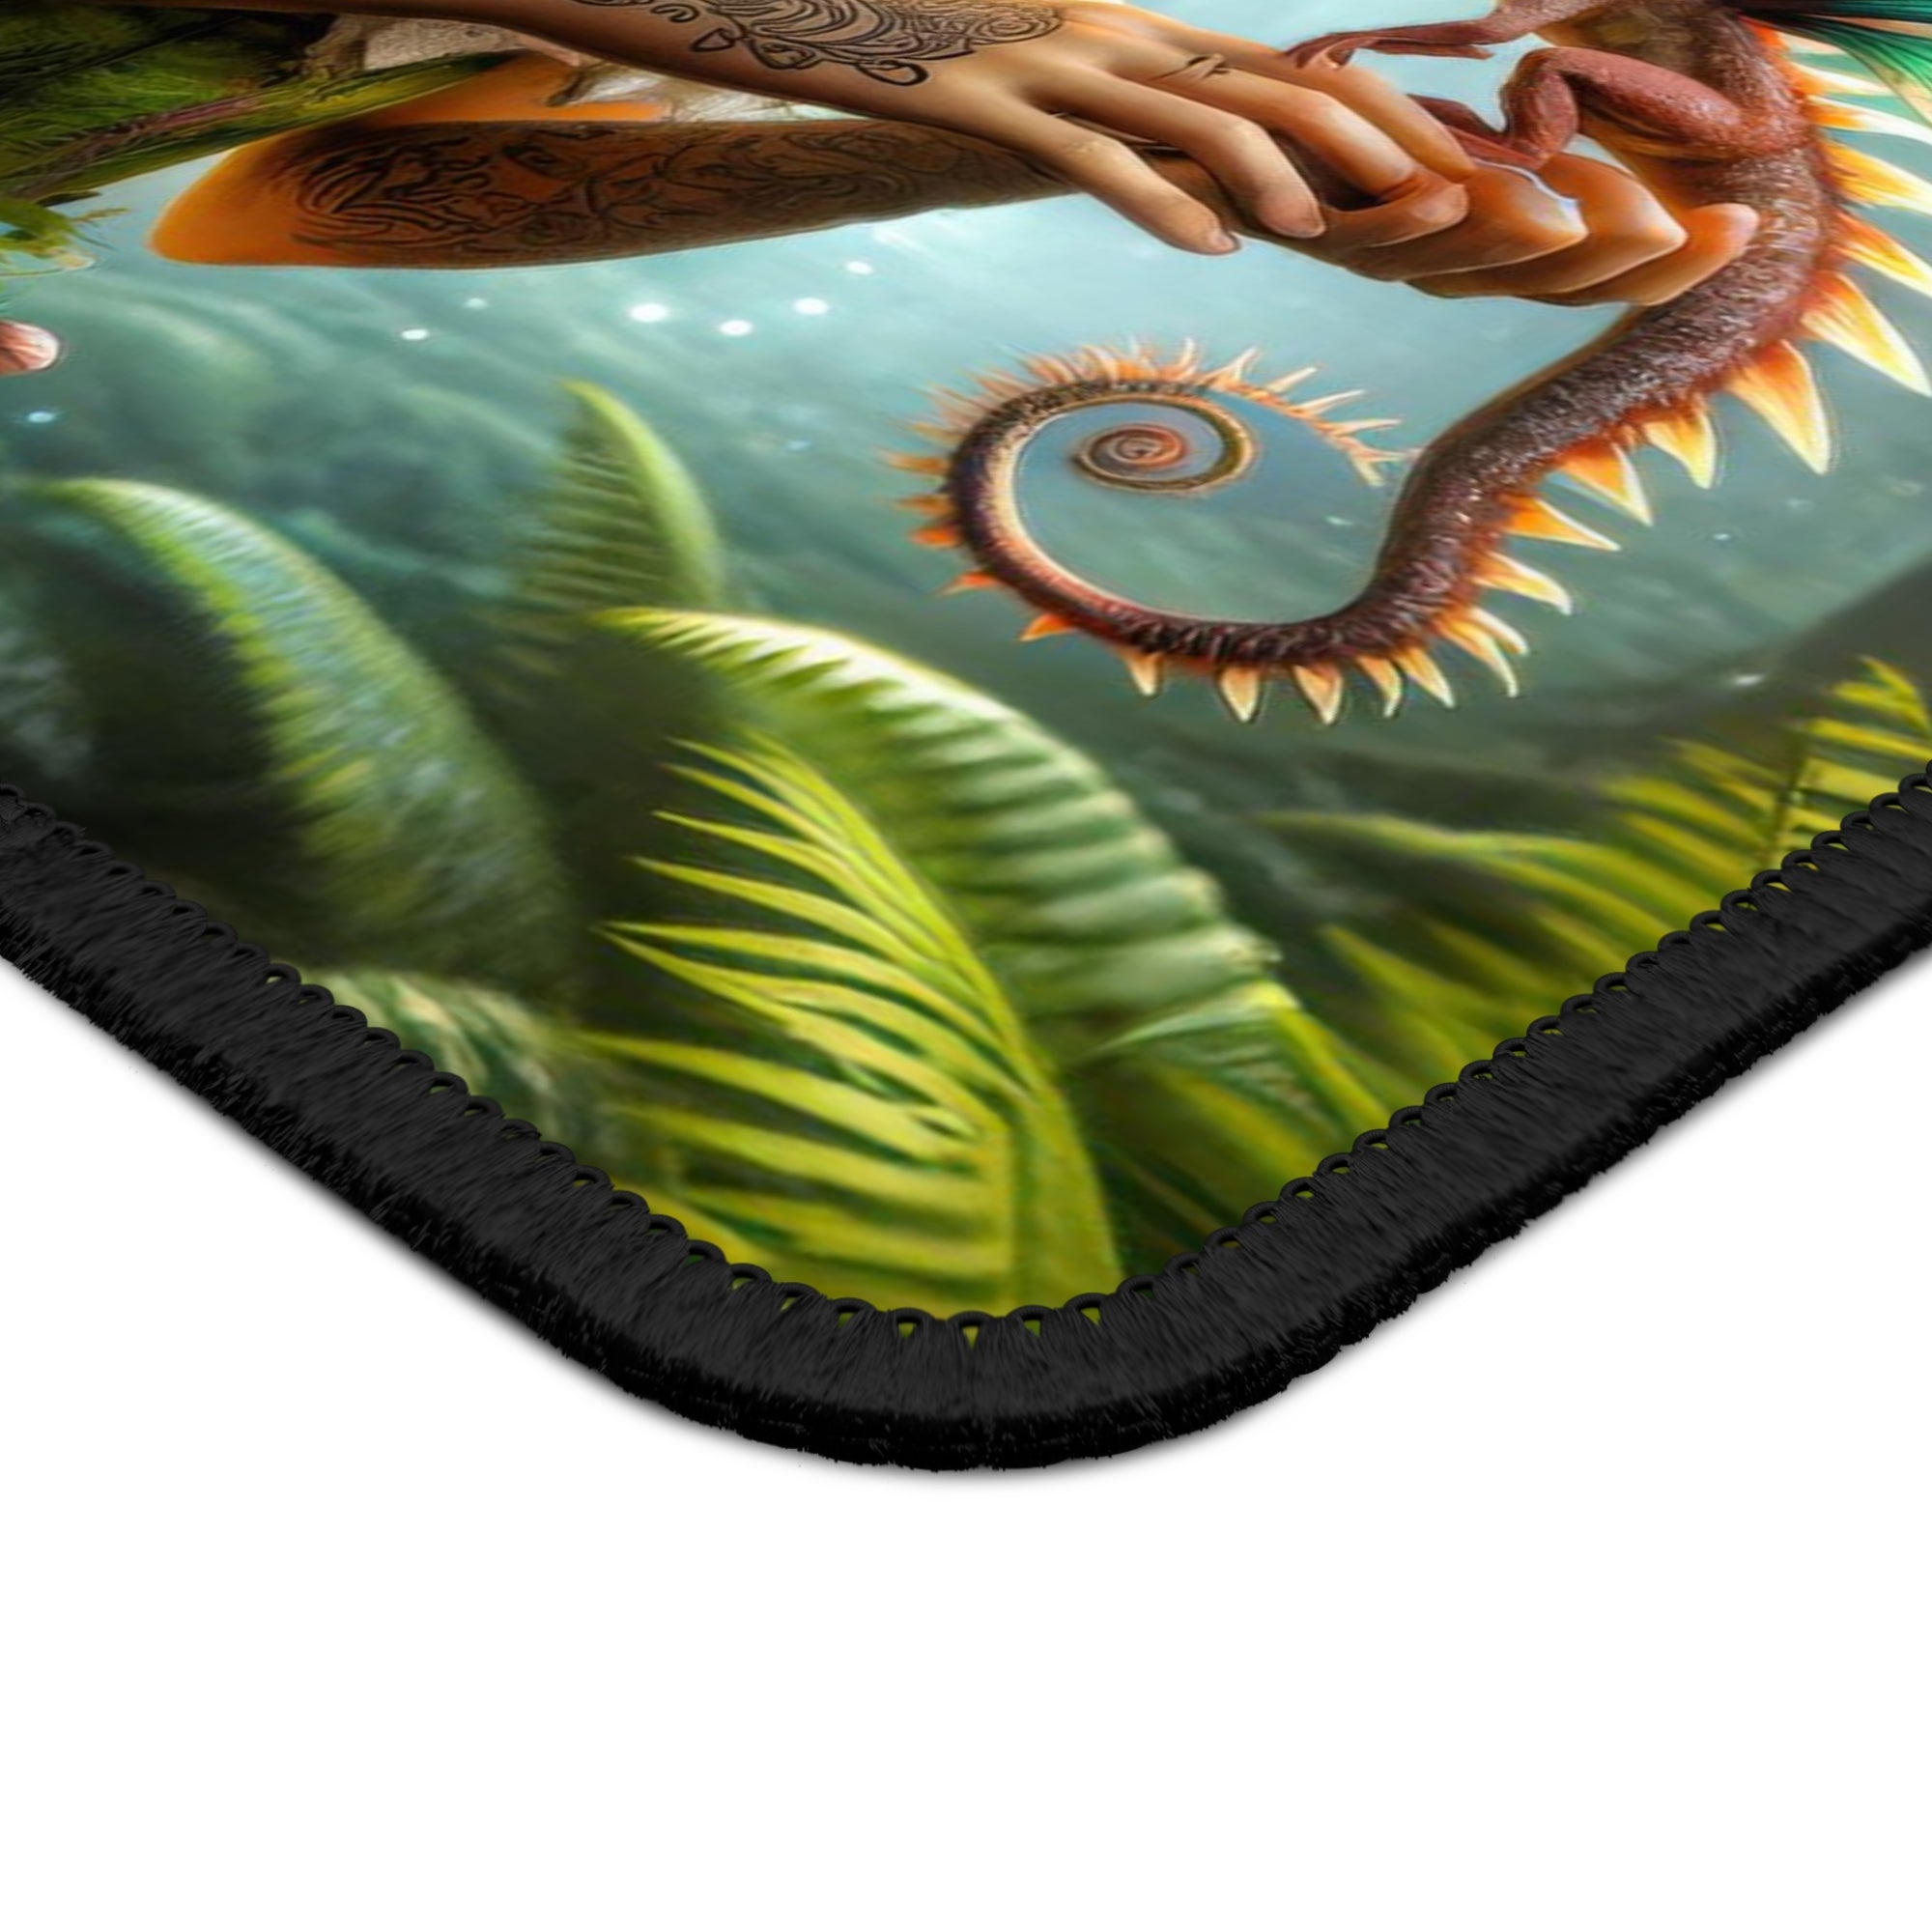 The Faerie and Her Dragonette Mouse Pad